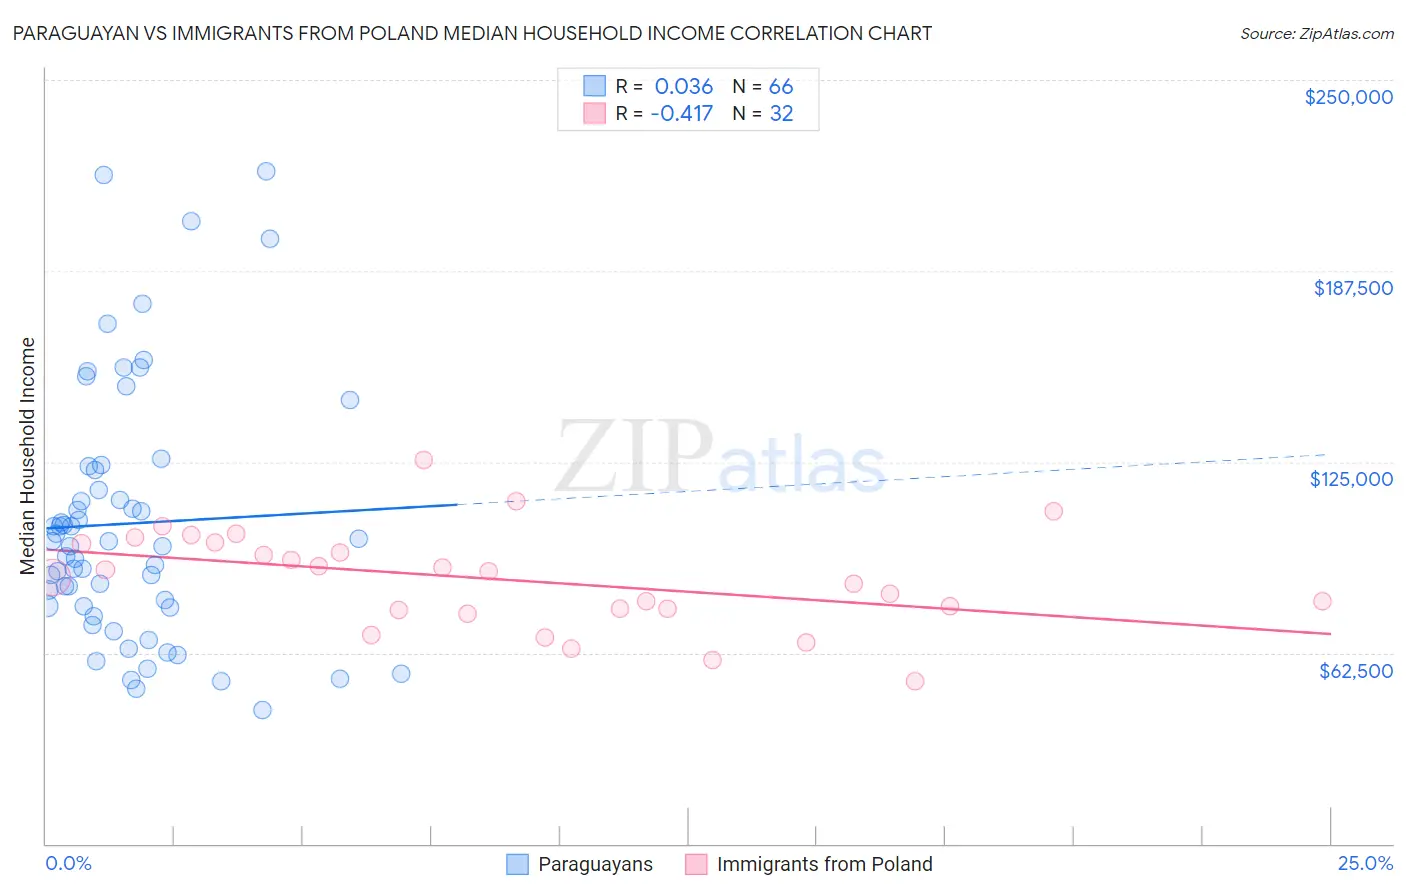 Paraguayan vs Immigrants from Poland Median Household Income